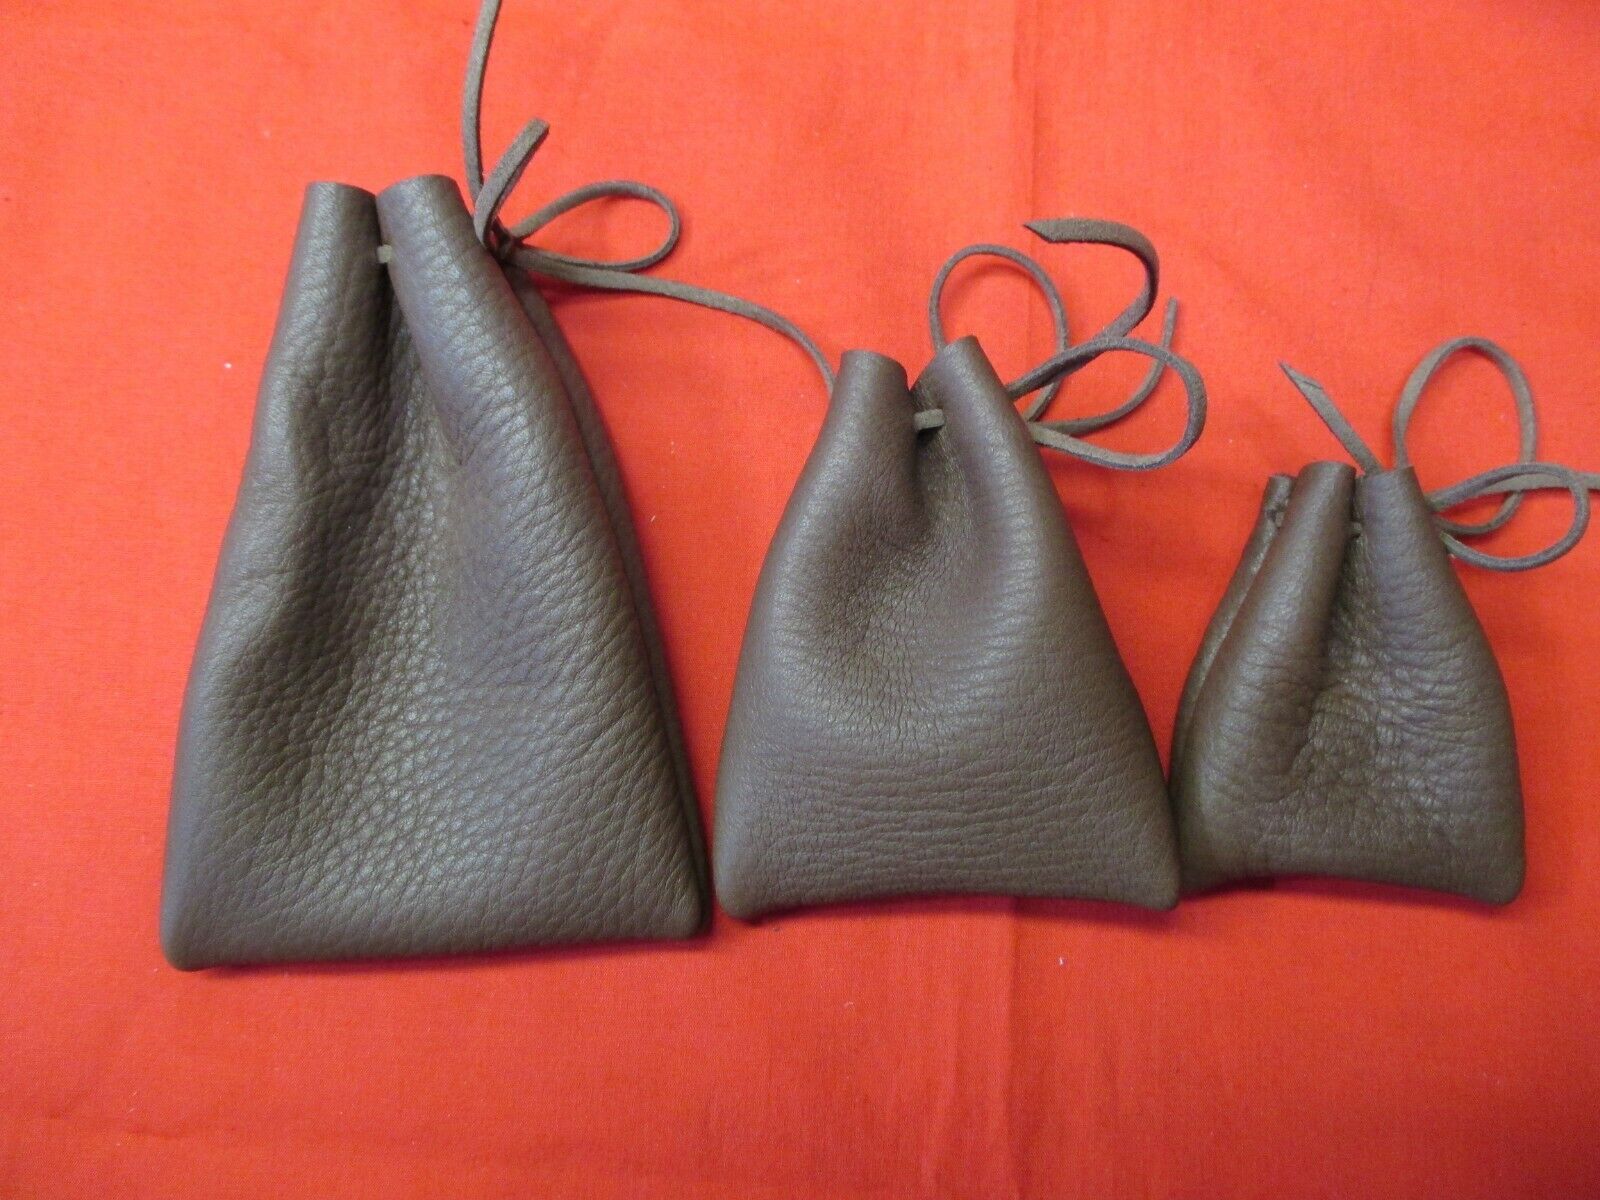 3 GENUINE NEW ZEALAND DEERSKIN Drawstring Pouches, Coins, Hunting, MIsc Use   Handmade Does Not Apply